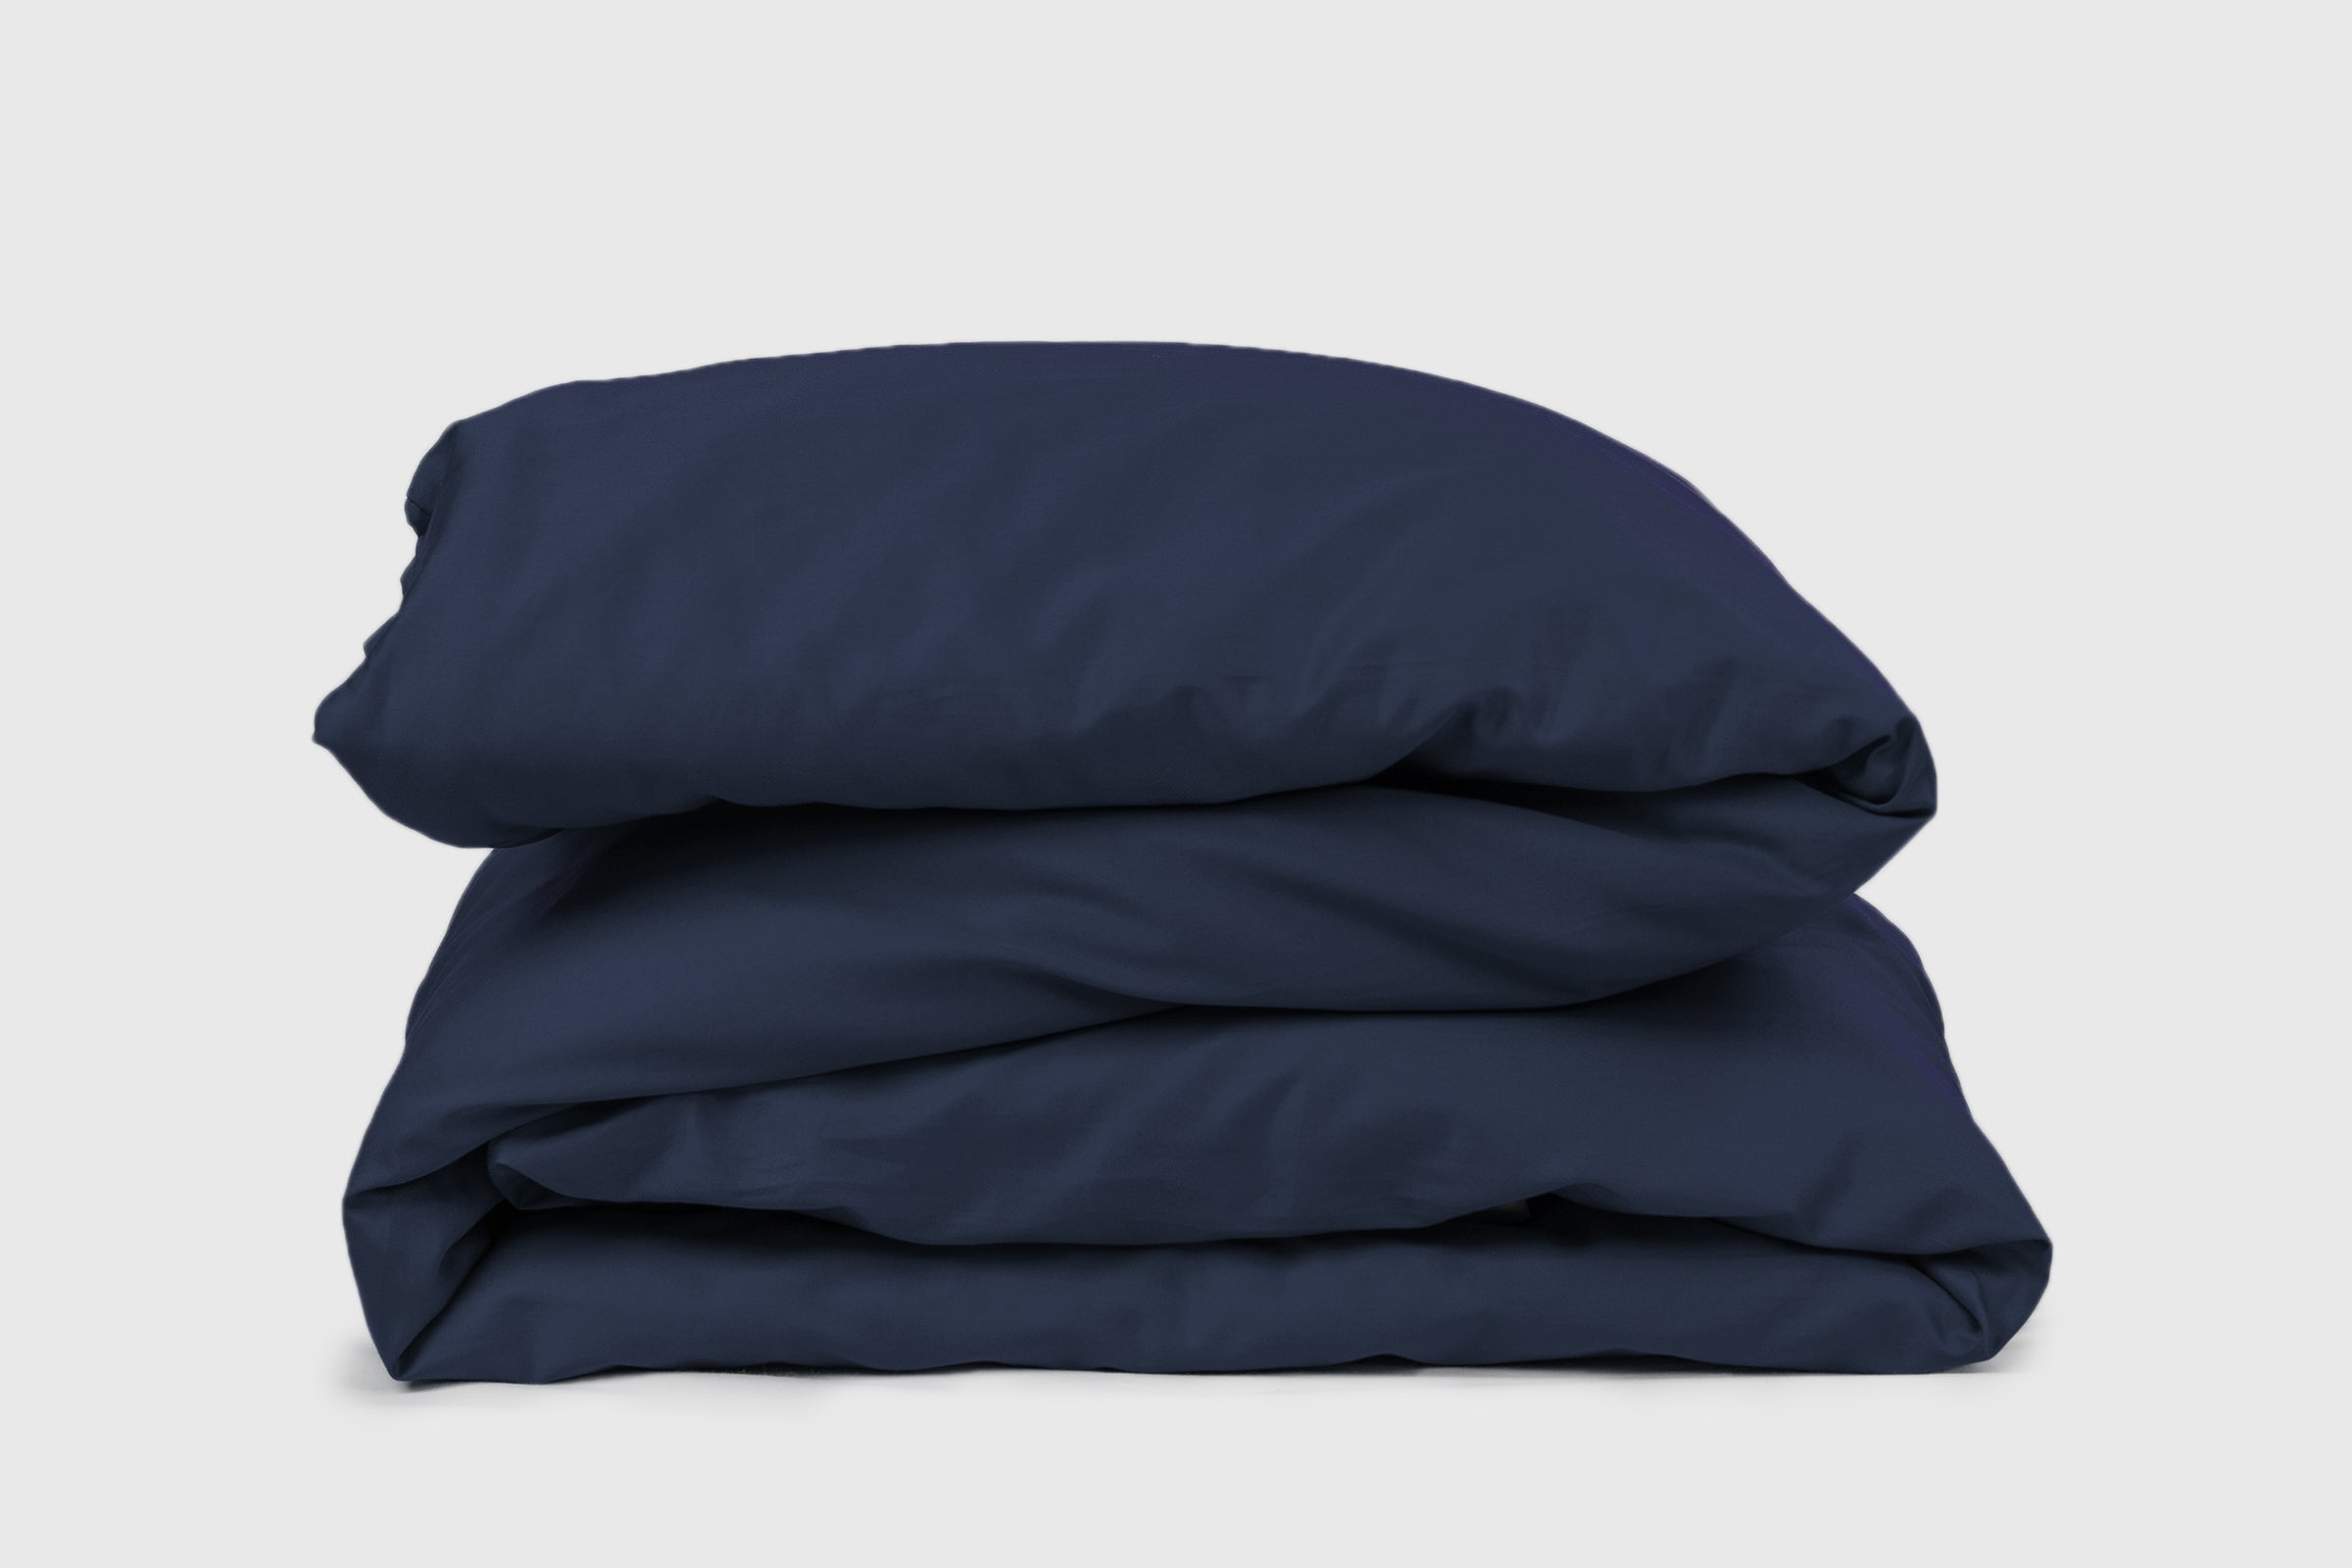 classic-navy-duvet-cover-product-shot-by-sojao.jpg